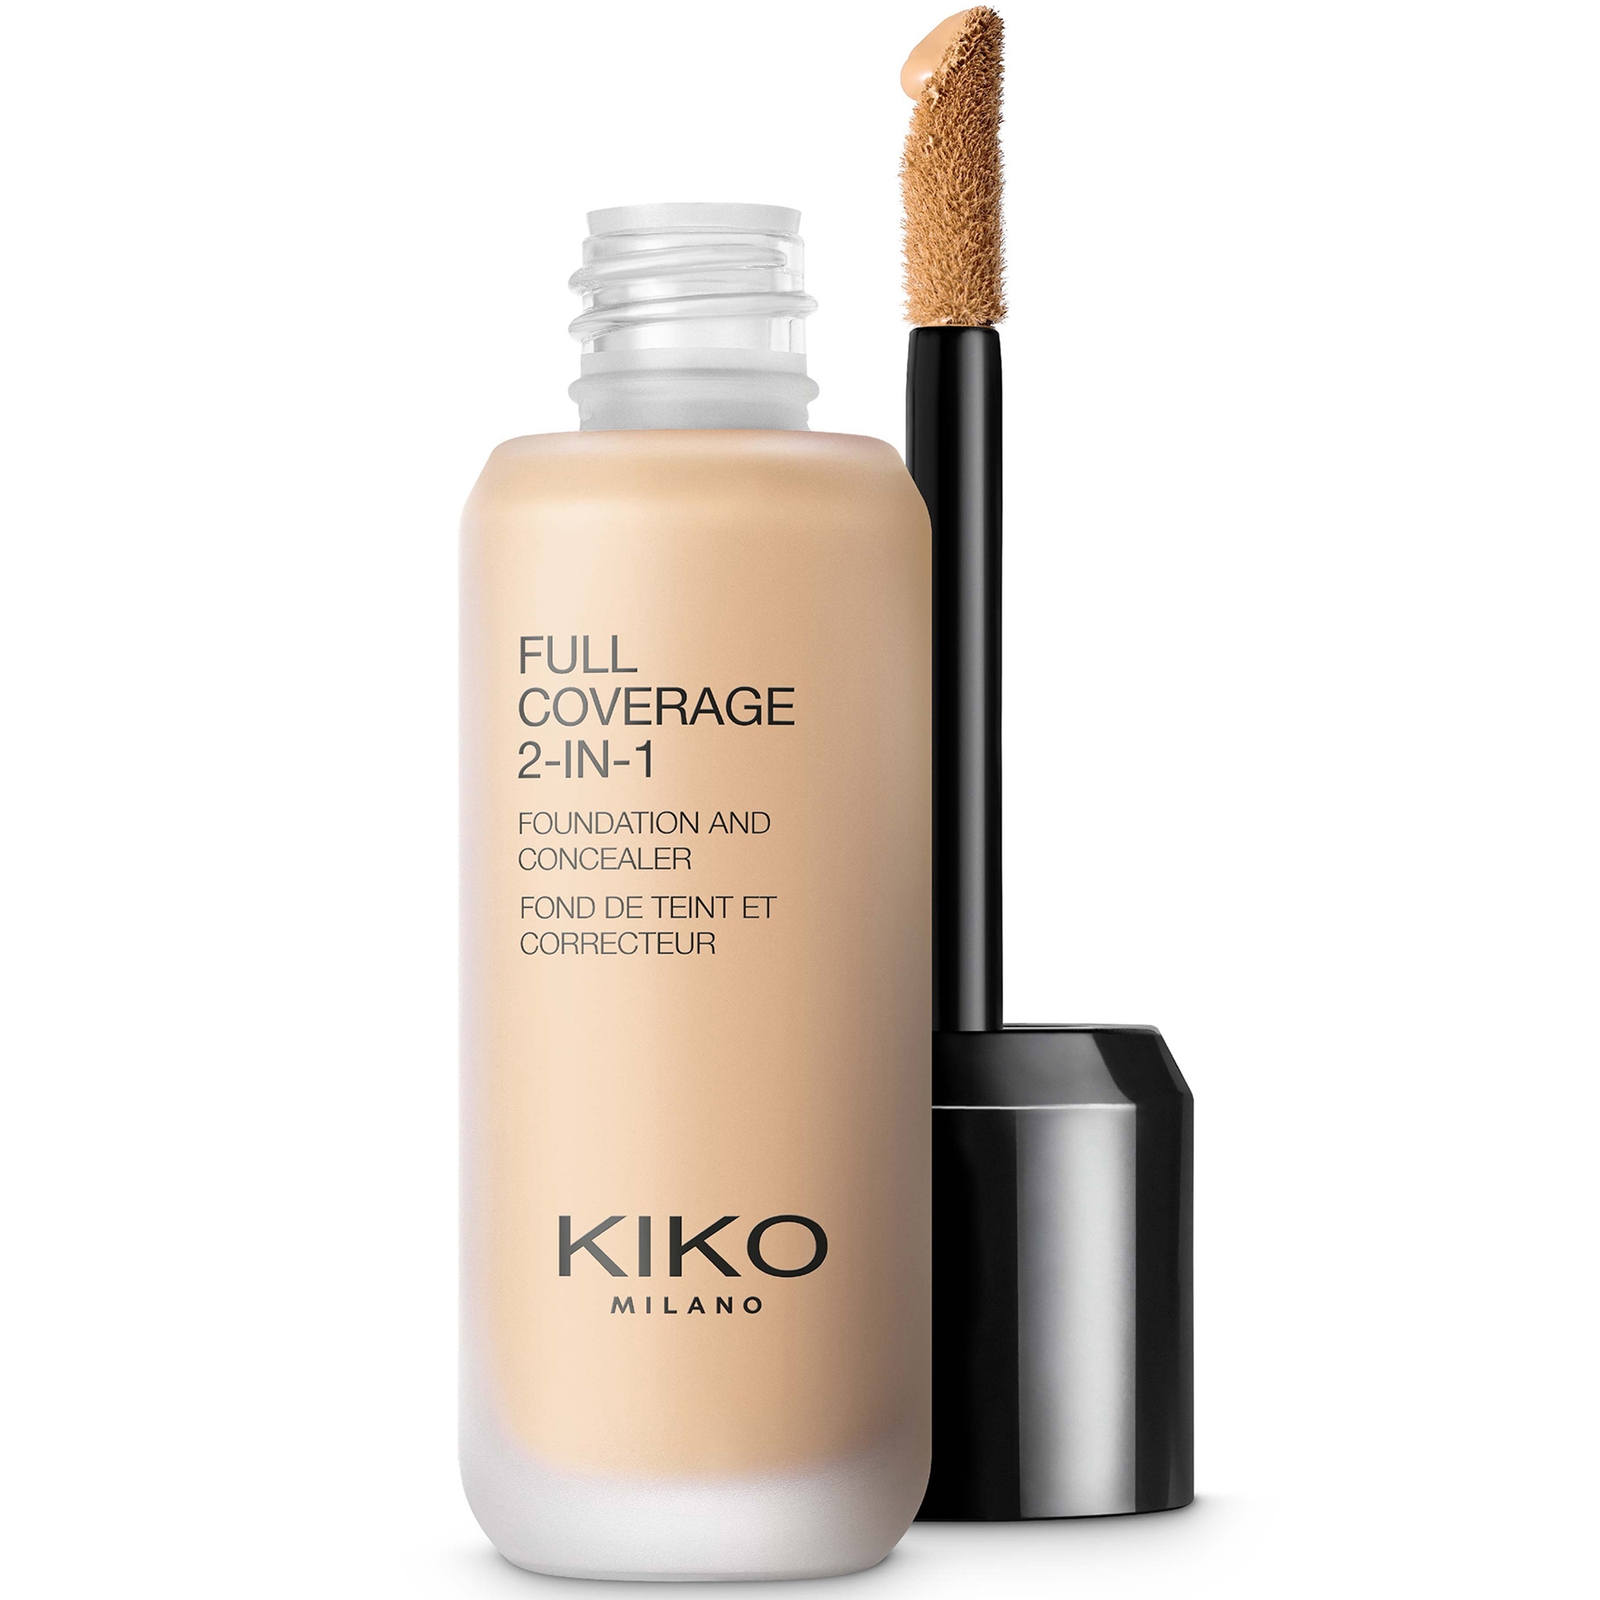 KIKO Milano Full Coverage 2-in-1 Foundation and Concealer 25ml (Various Shades) - 25 Neutral